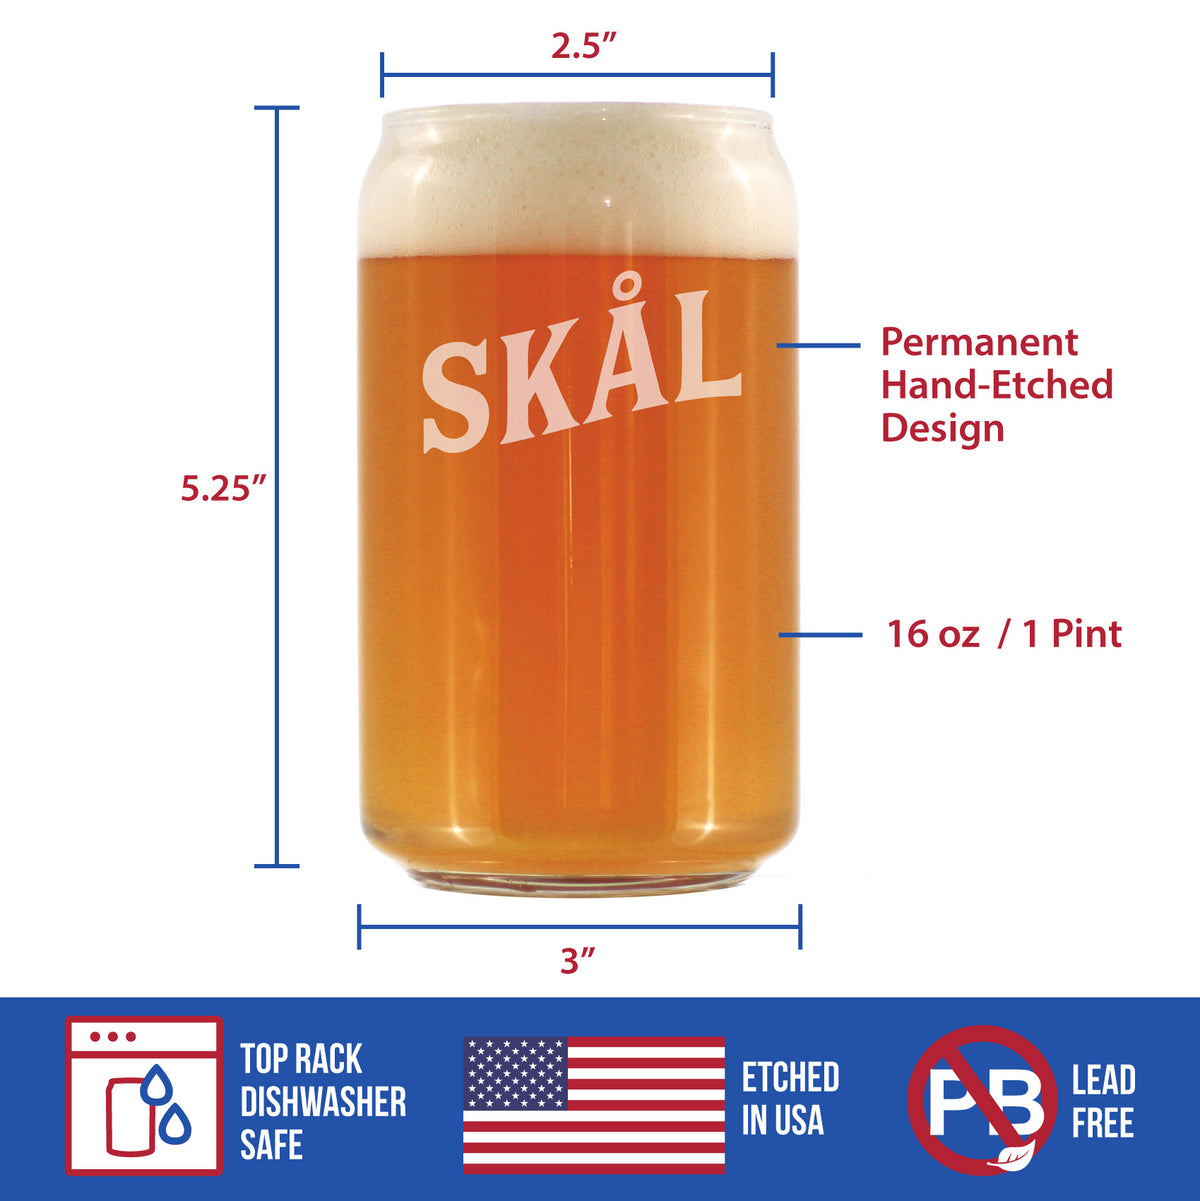 Skal - Norwegian Cheers - Beer Can Pint Glass - Cute Sweden and Norway Themed Gifts or Party Decor for Women - 16 Oz